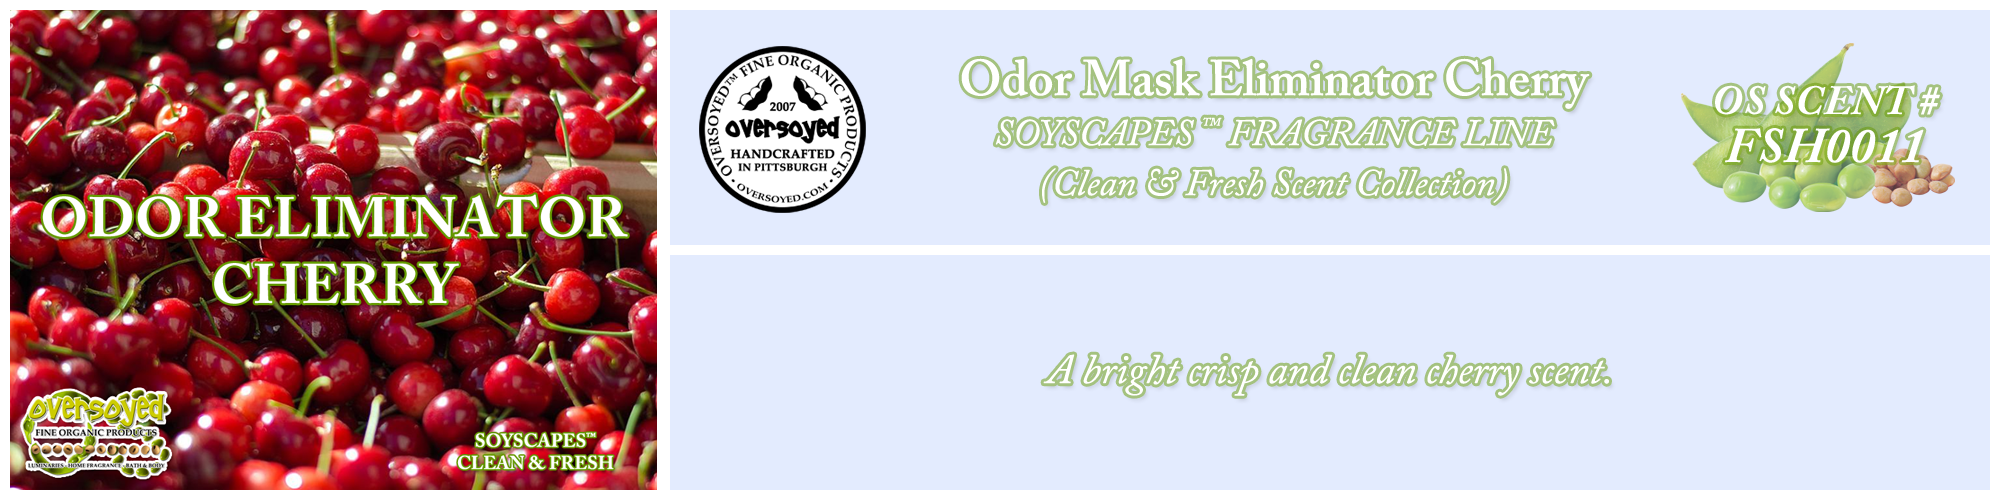 Odor Mask Eliminator Cherry Handcrafted Products Collection